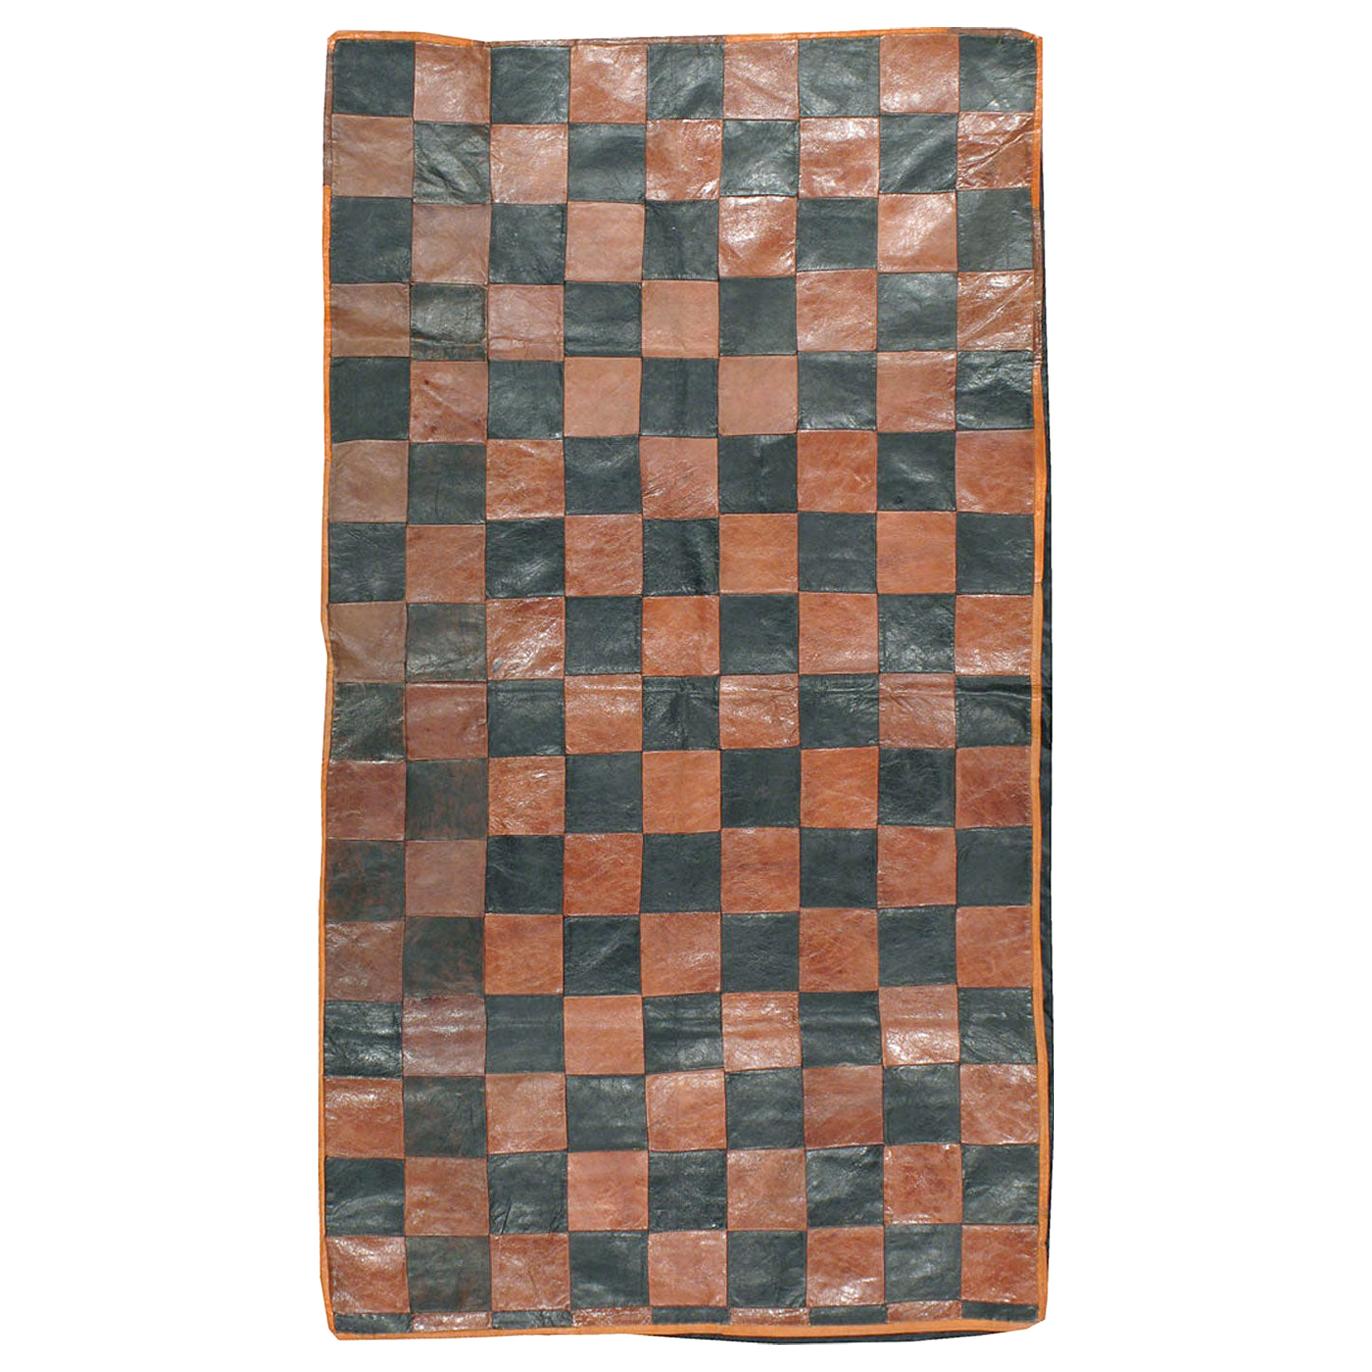 Brown and Black Italian Leather Checkerboard Rug